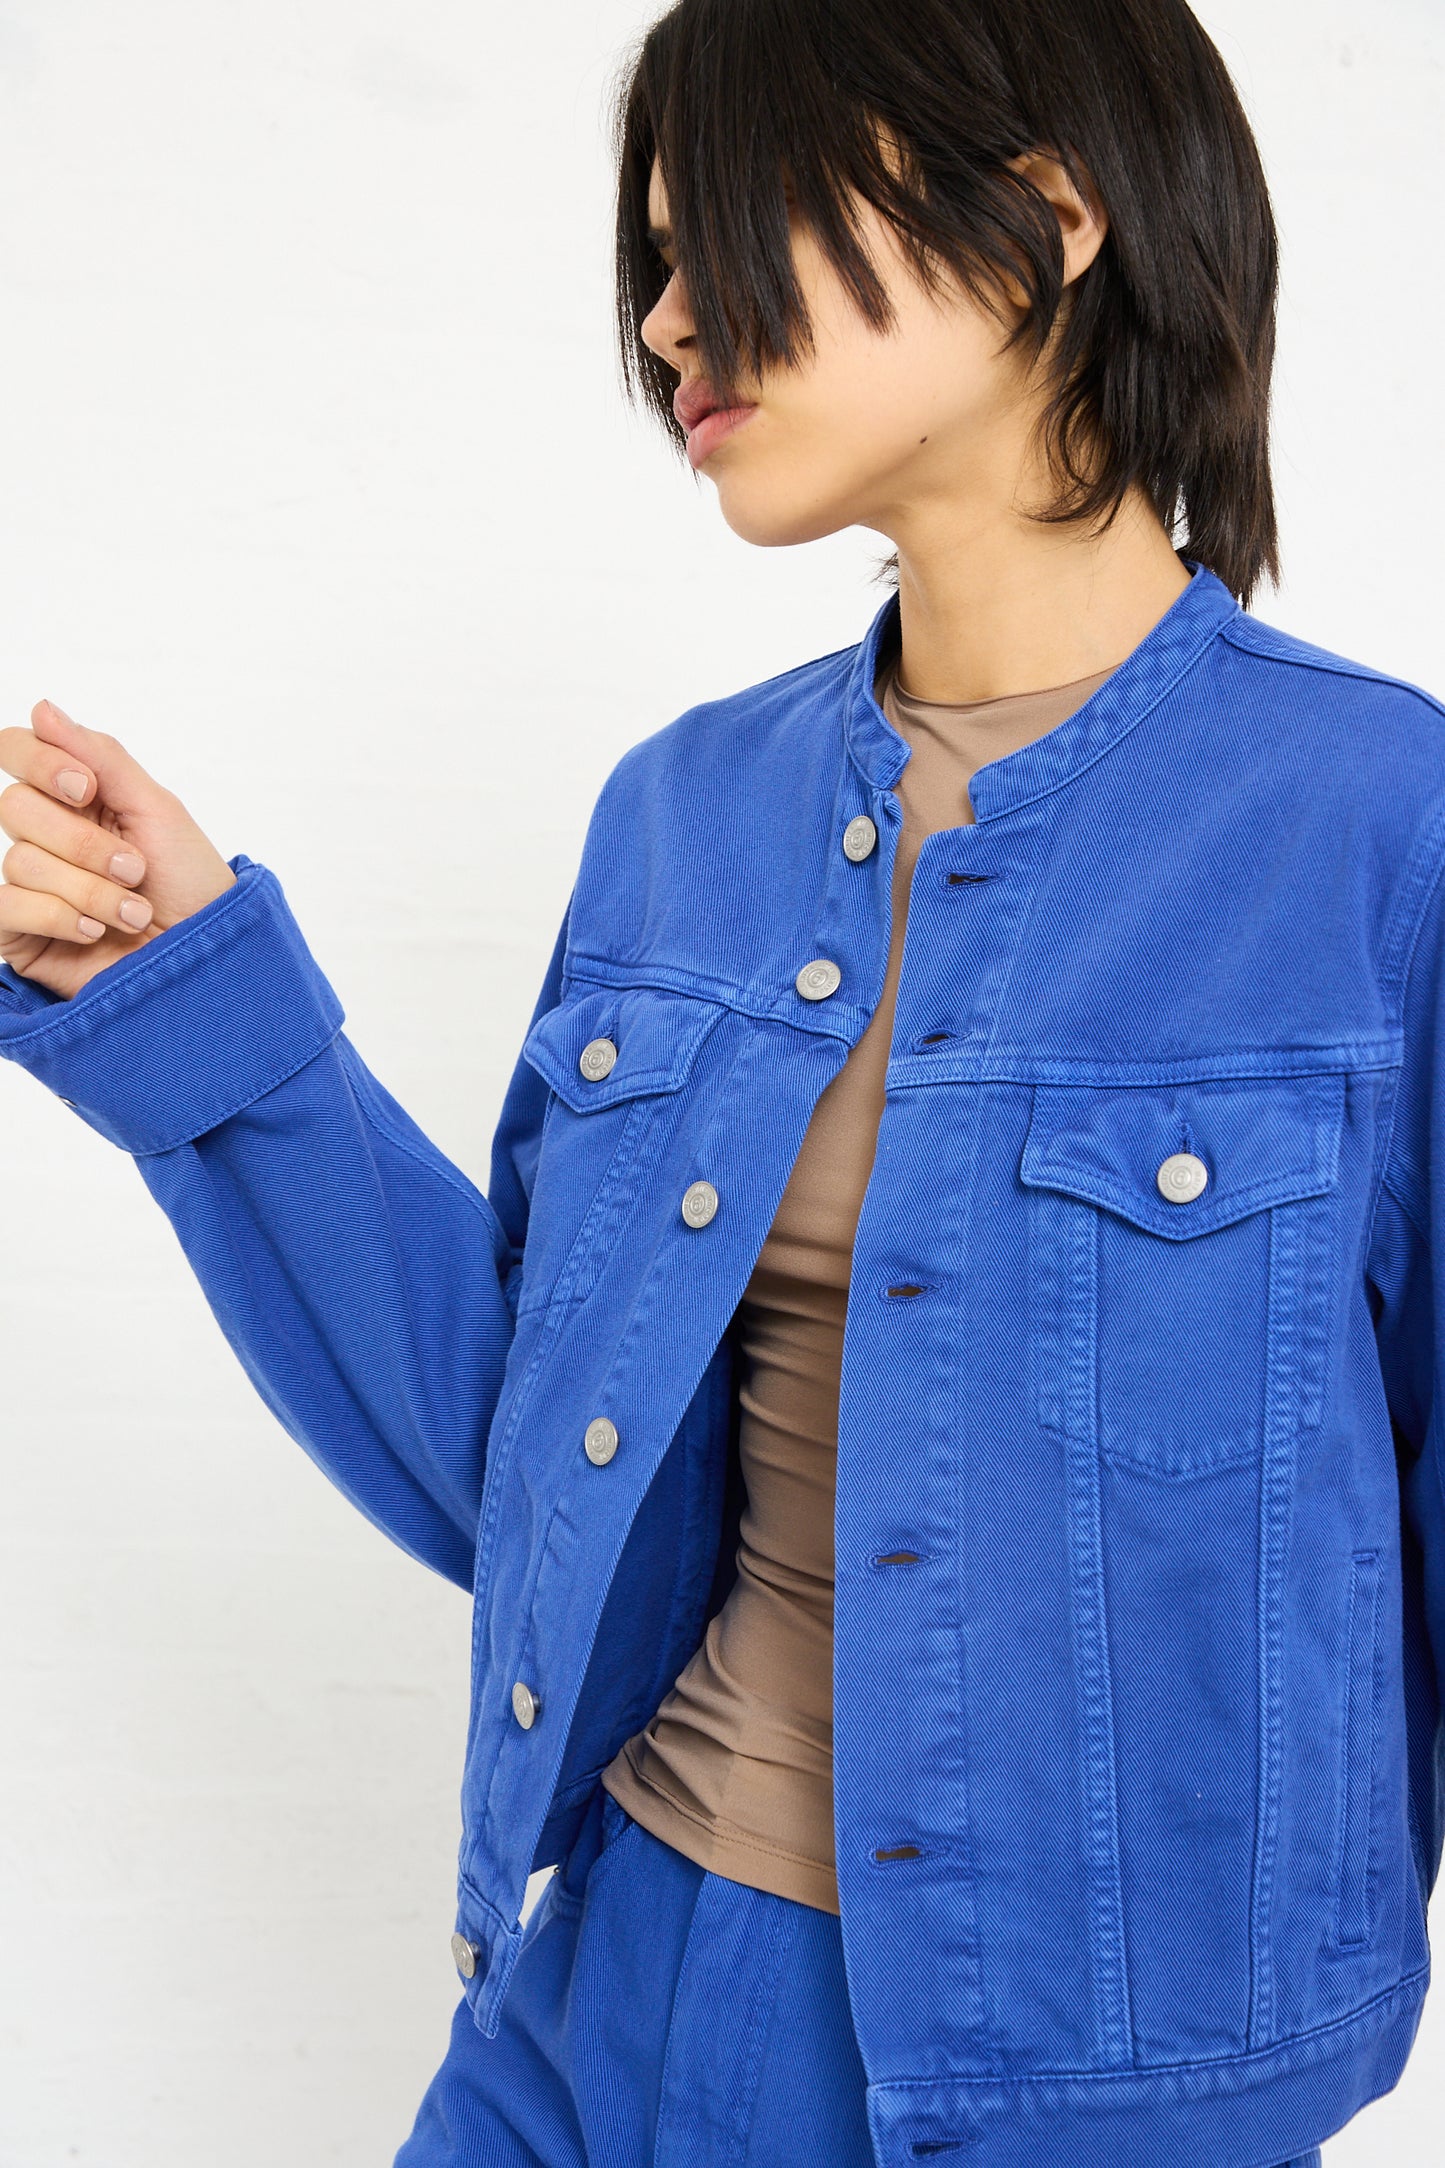 Woman in a blue MM6 Sports Jacket denim over a beige top, looking at her hand, against a white background.